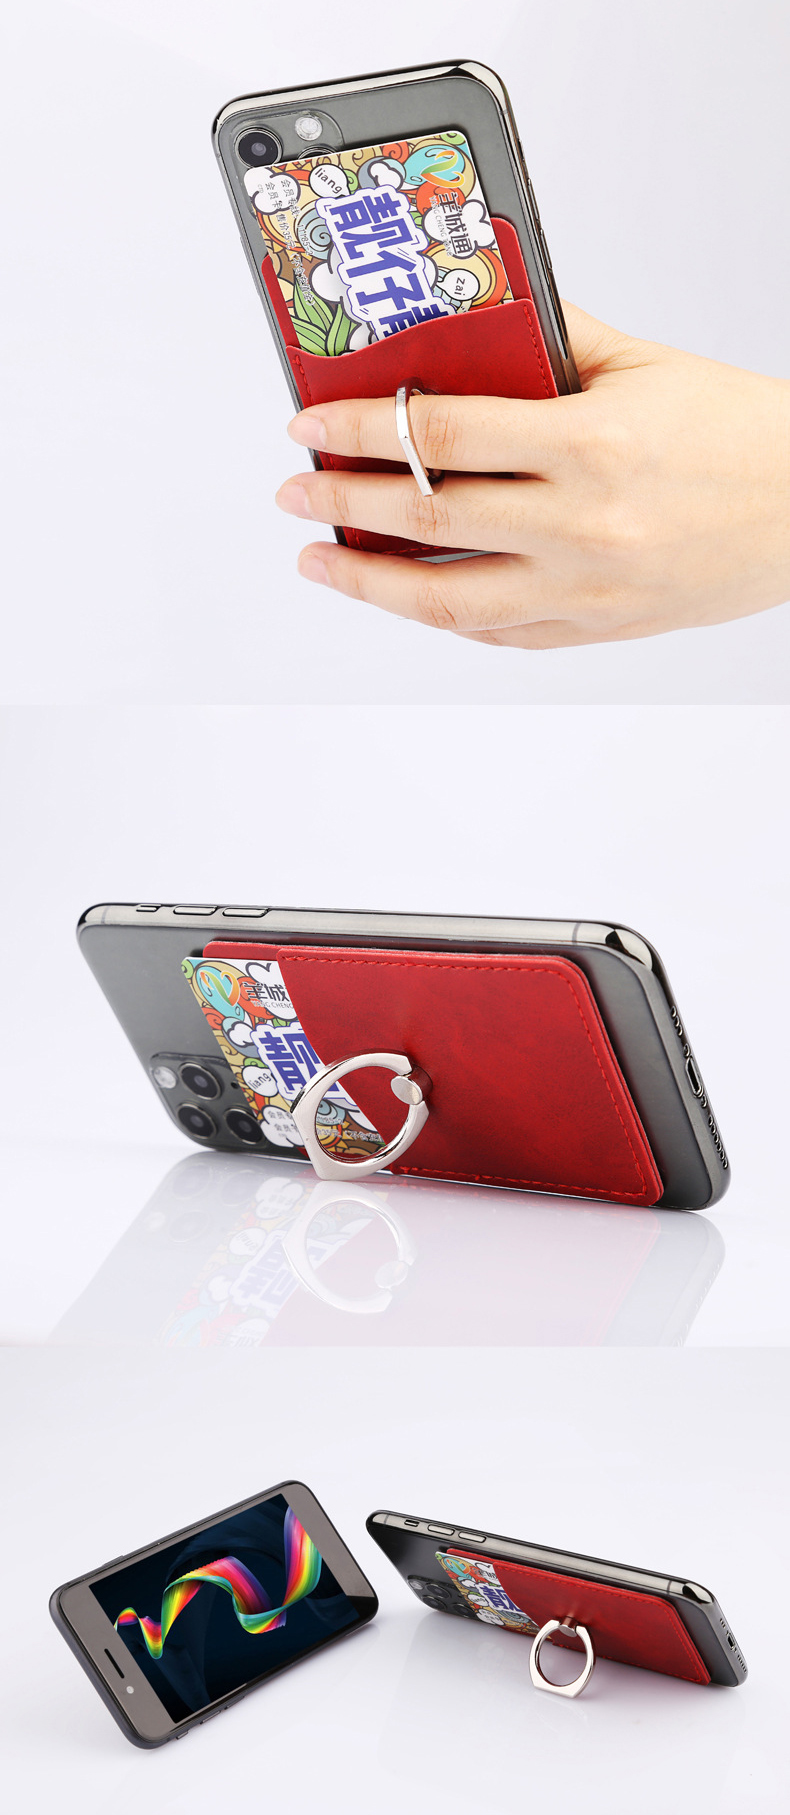 Universal-2-in-1-3M-Adhesive-Sticker-PU-Leather-Mobile-Phone-Holder-Ring-Stand-with-Card-Slot-for-Al-1688322-7